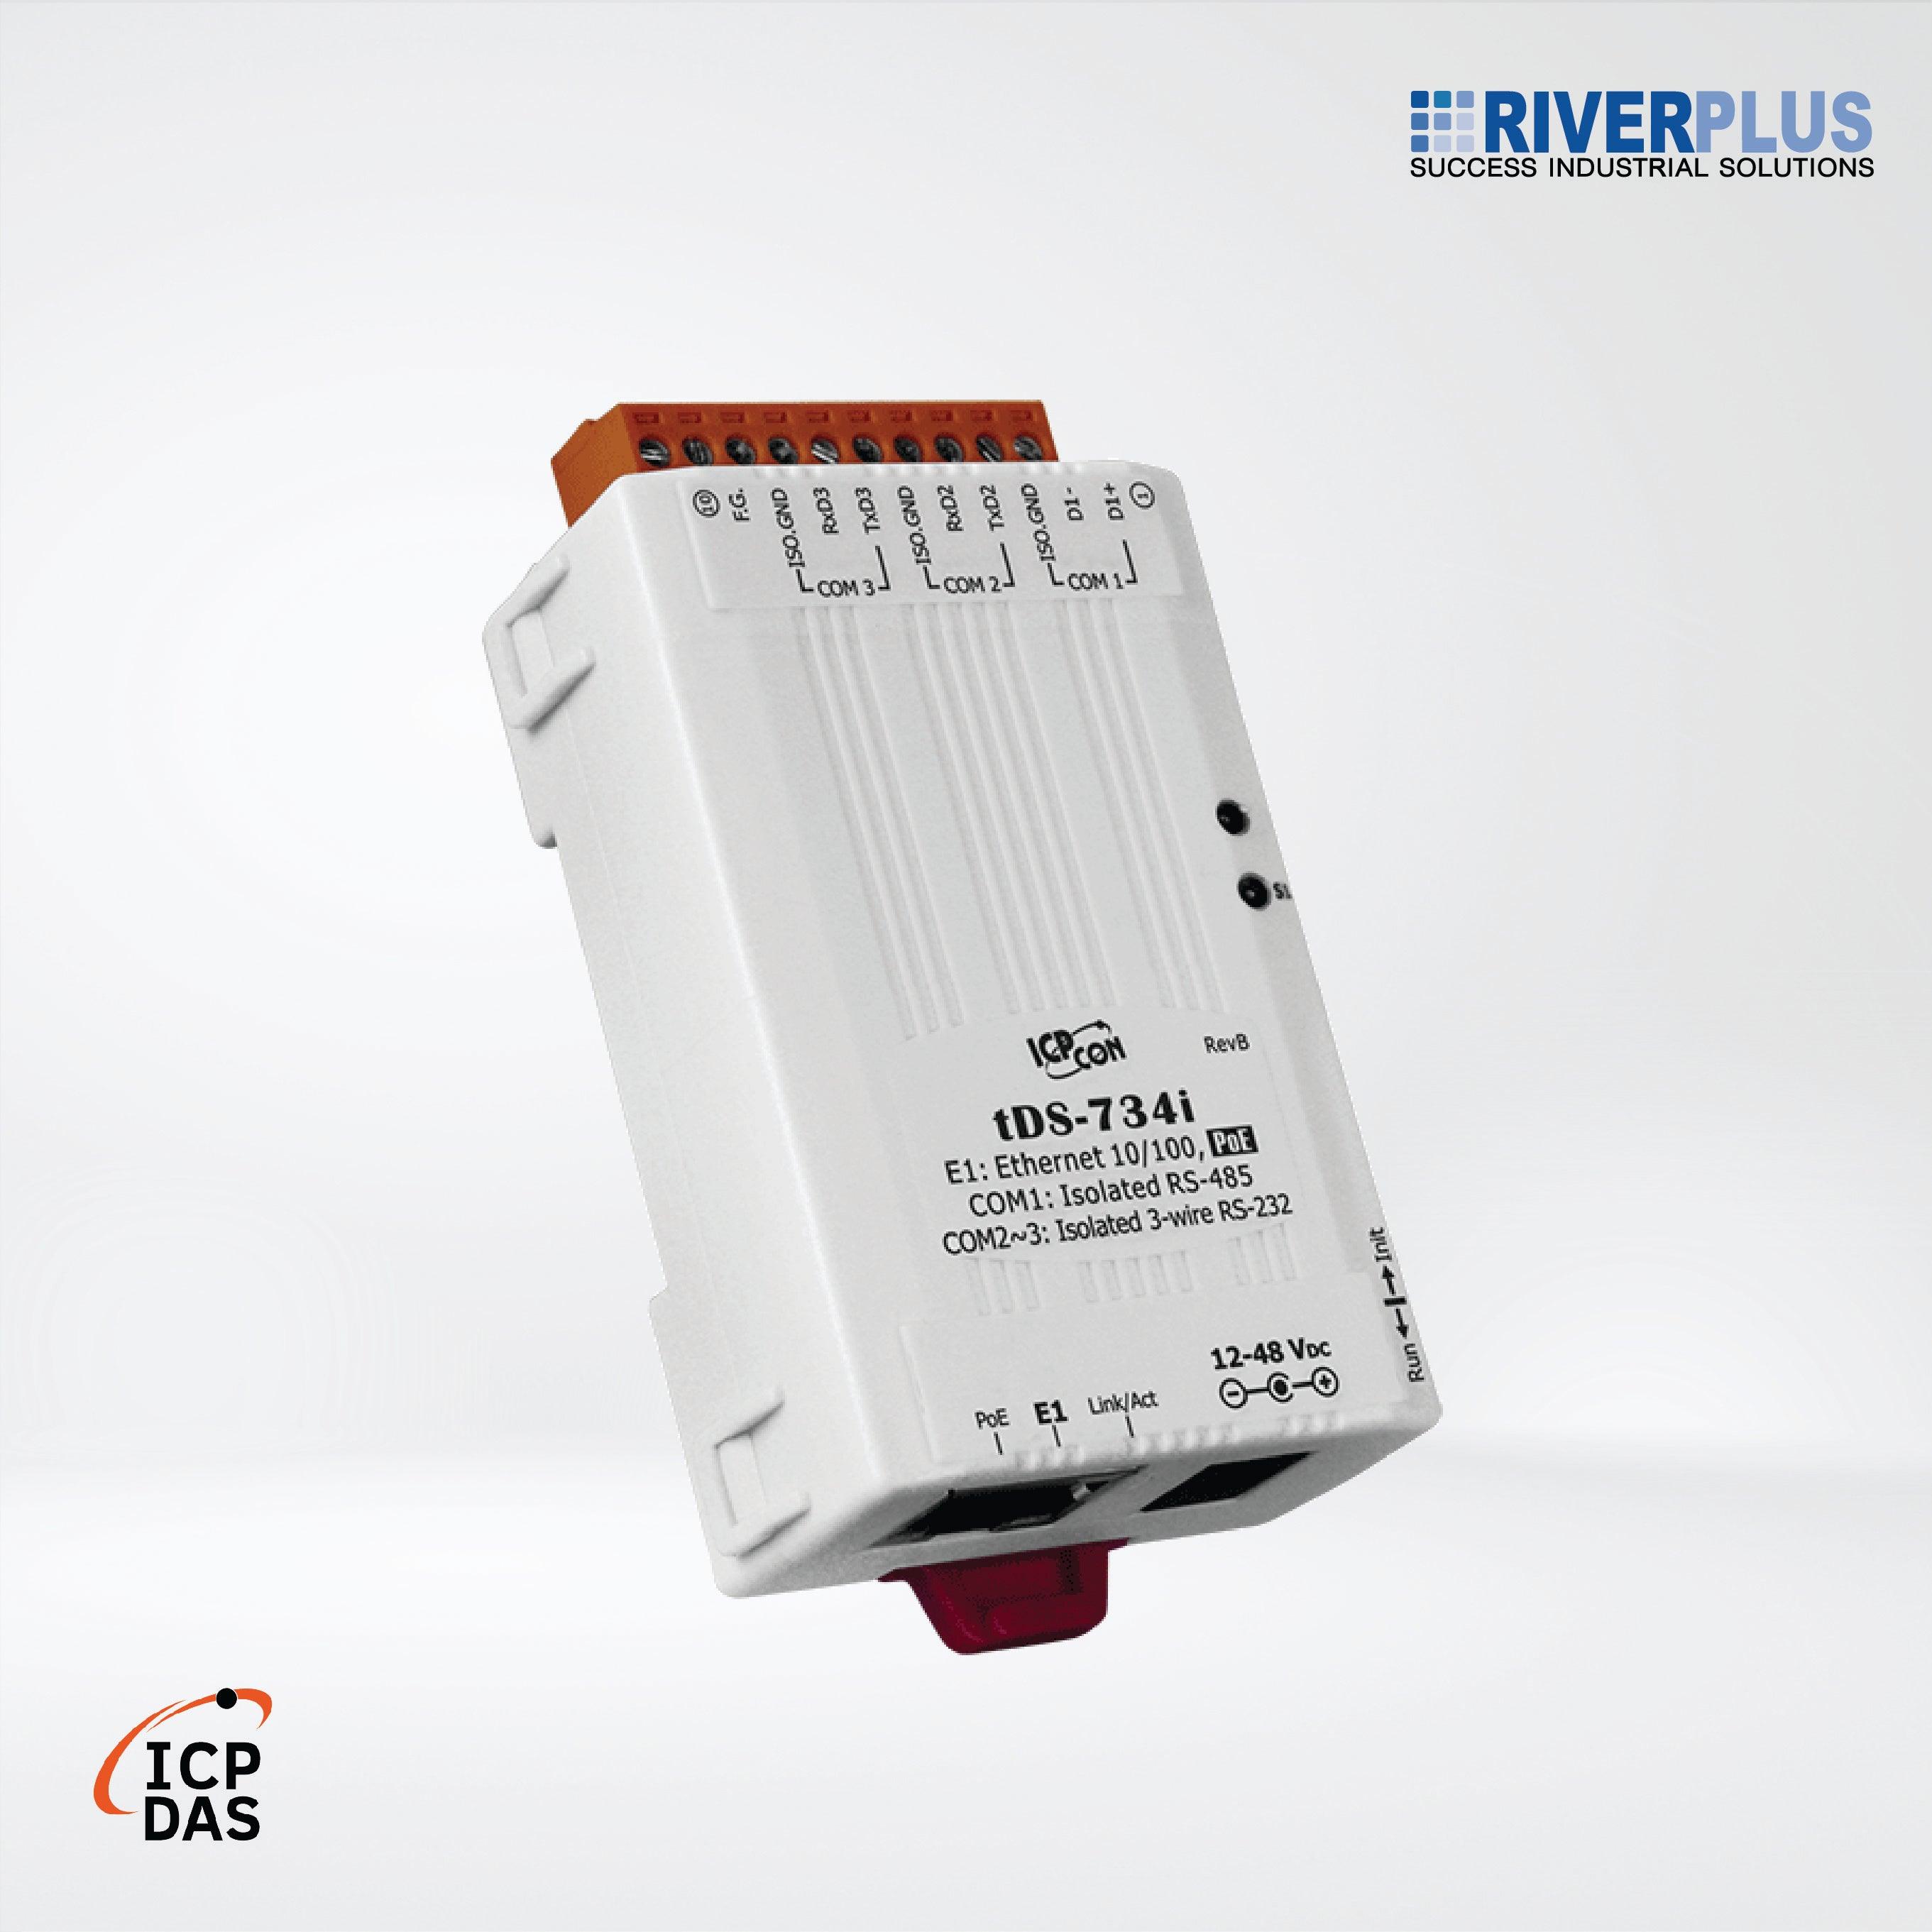 tDS-734i CR Tiny (2x Isolated RS-232 and 1x Isolated RS-485) Serial-to-Ethernet Device Server with PoE - Riverplus